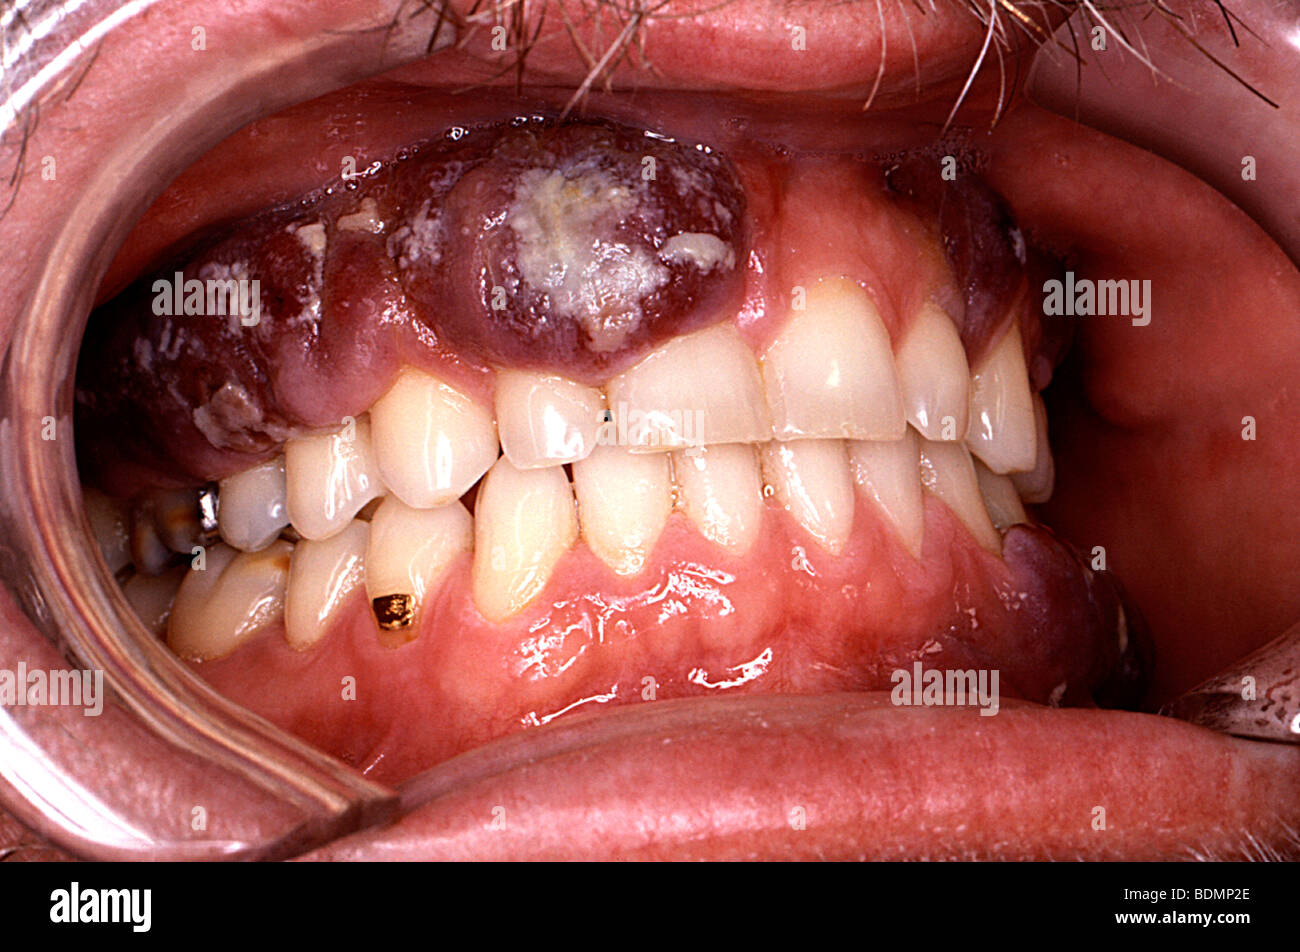 Intraoral Kaposi's sarcoma lesion with an overlying candidiasis infection in an HIV-positive patient Stock Photo